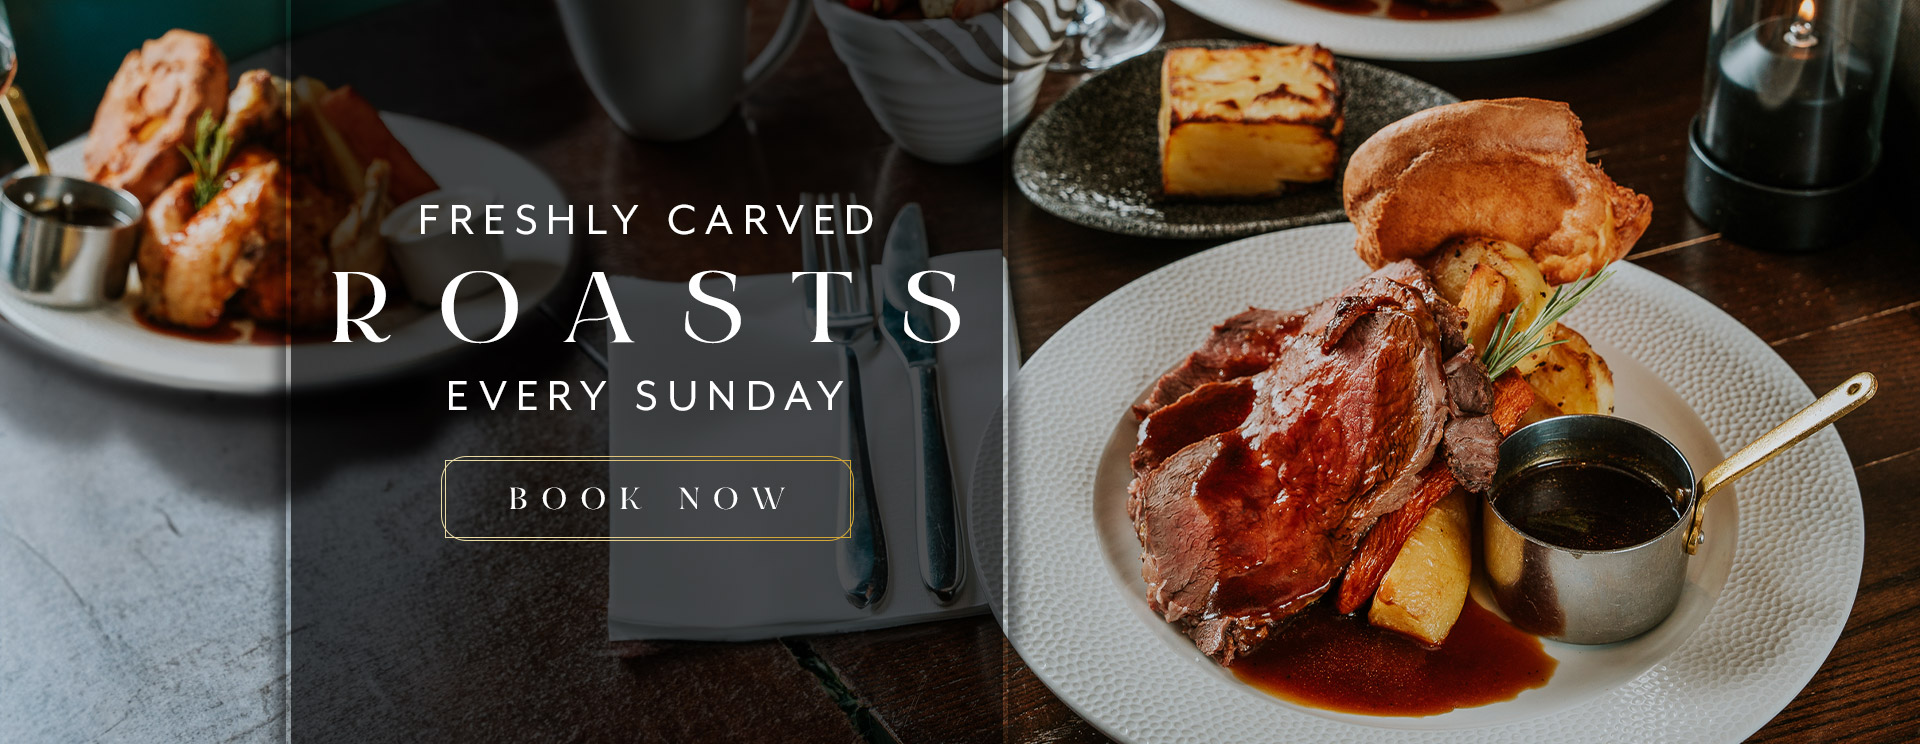 Sunday Lunch at The Arkley